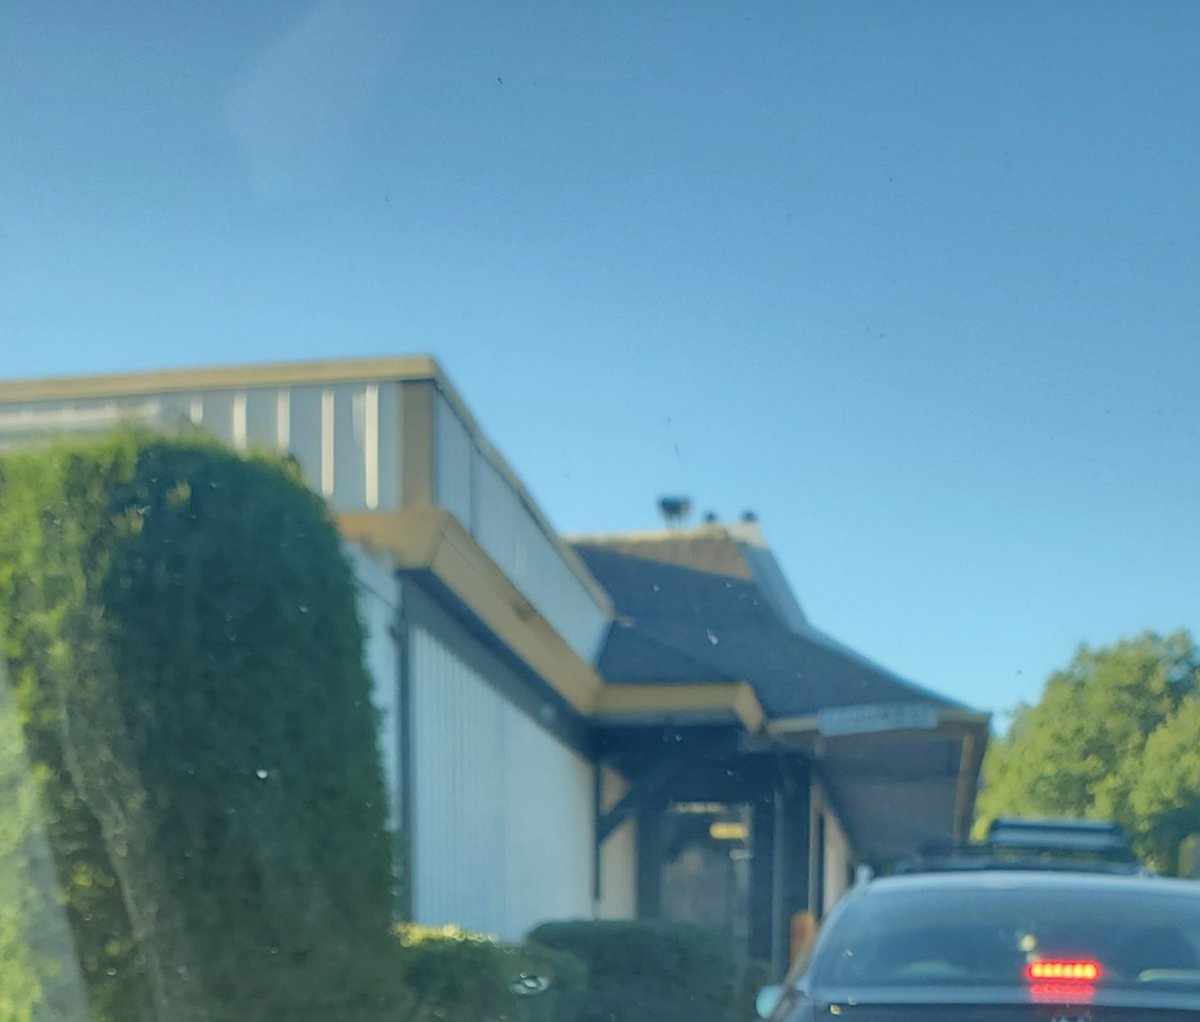 Like a jackass, I stopped at McDonald's to get a shake. '..we're out of shake mix'. That's fine, I'll take a cone. Nope, can't do that either. Guess why. I'm the dummy for stopping there. There's a reason for their ice cream machine reputation. #McDonalds #RedmondWA #DairyQueen